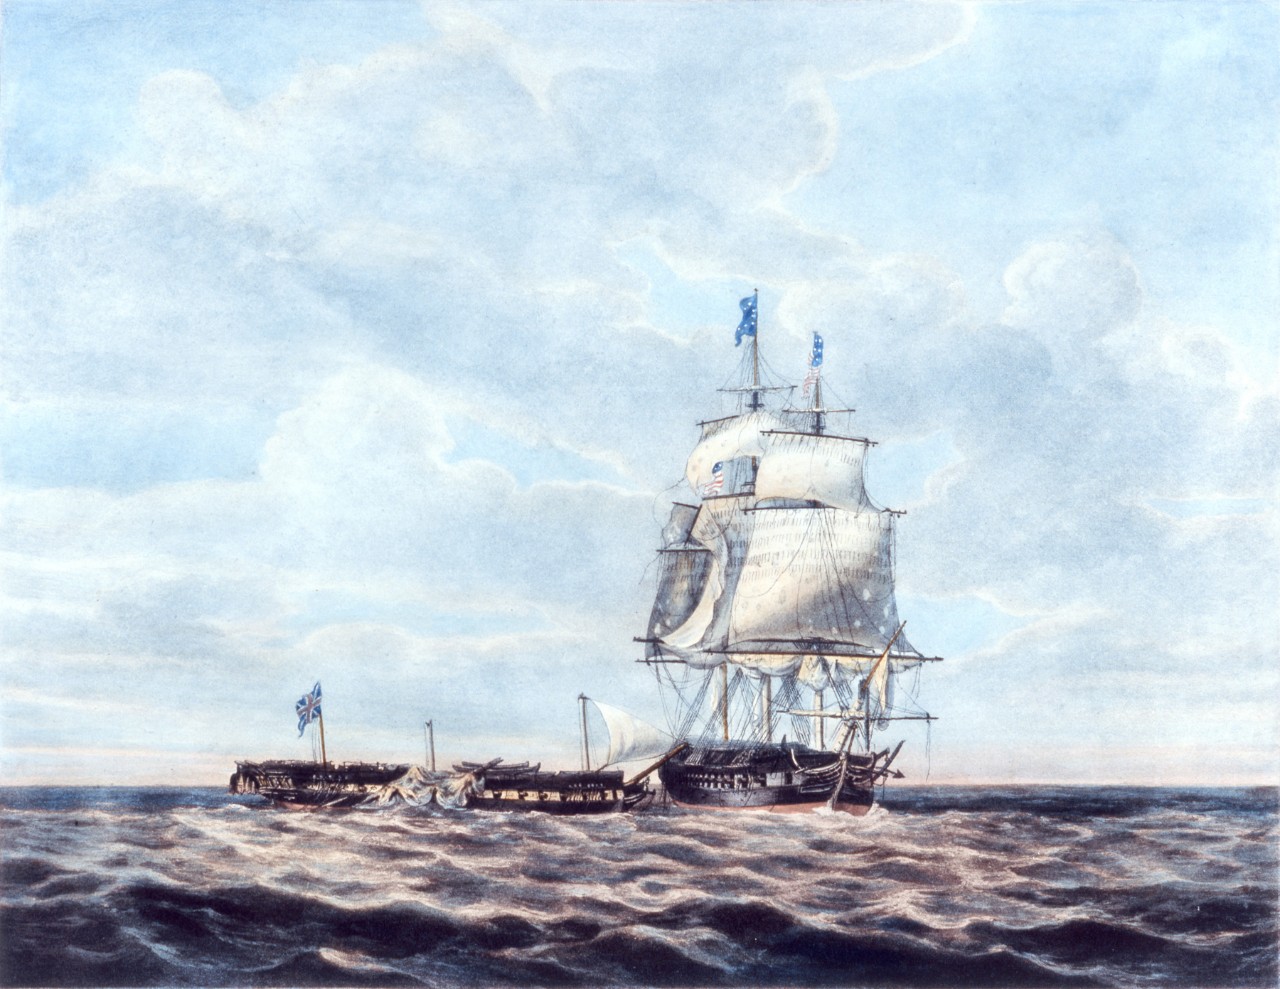 A ship on the left has lost all masts and sails with another ship, its sails entacted, is on the right